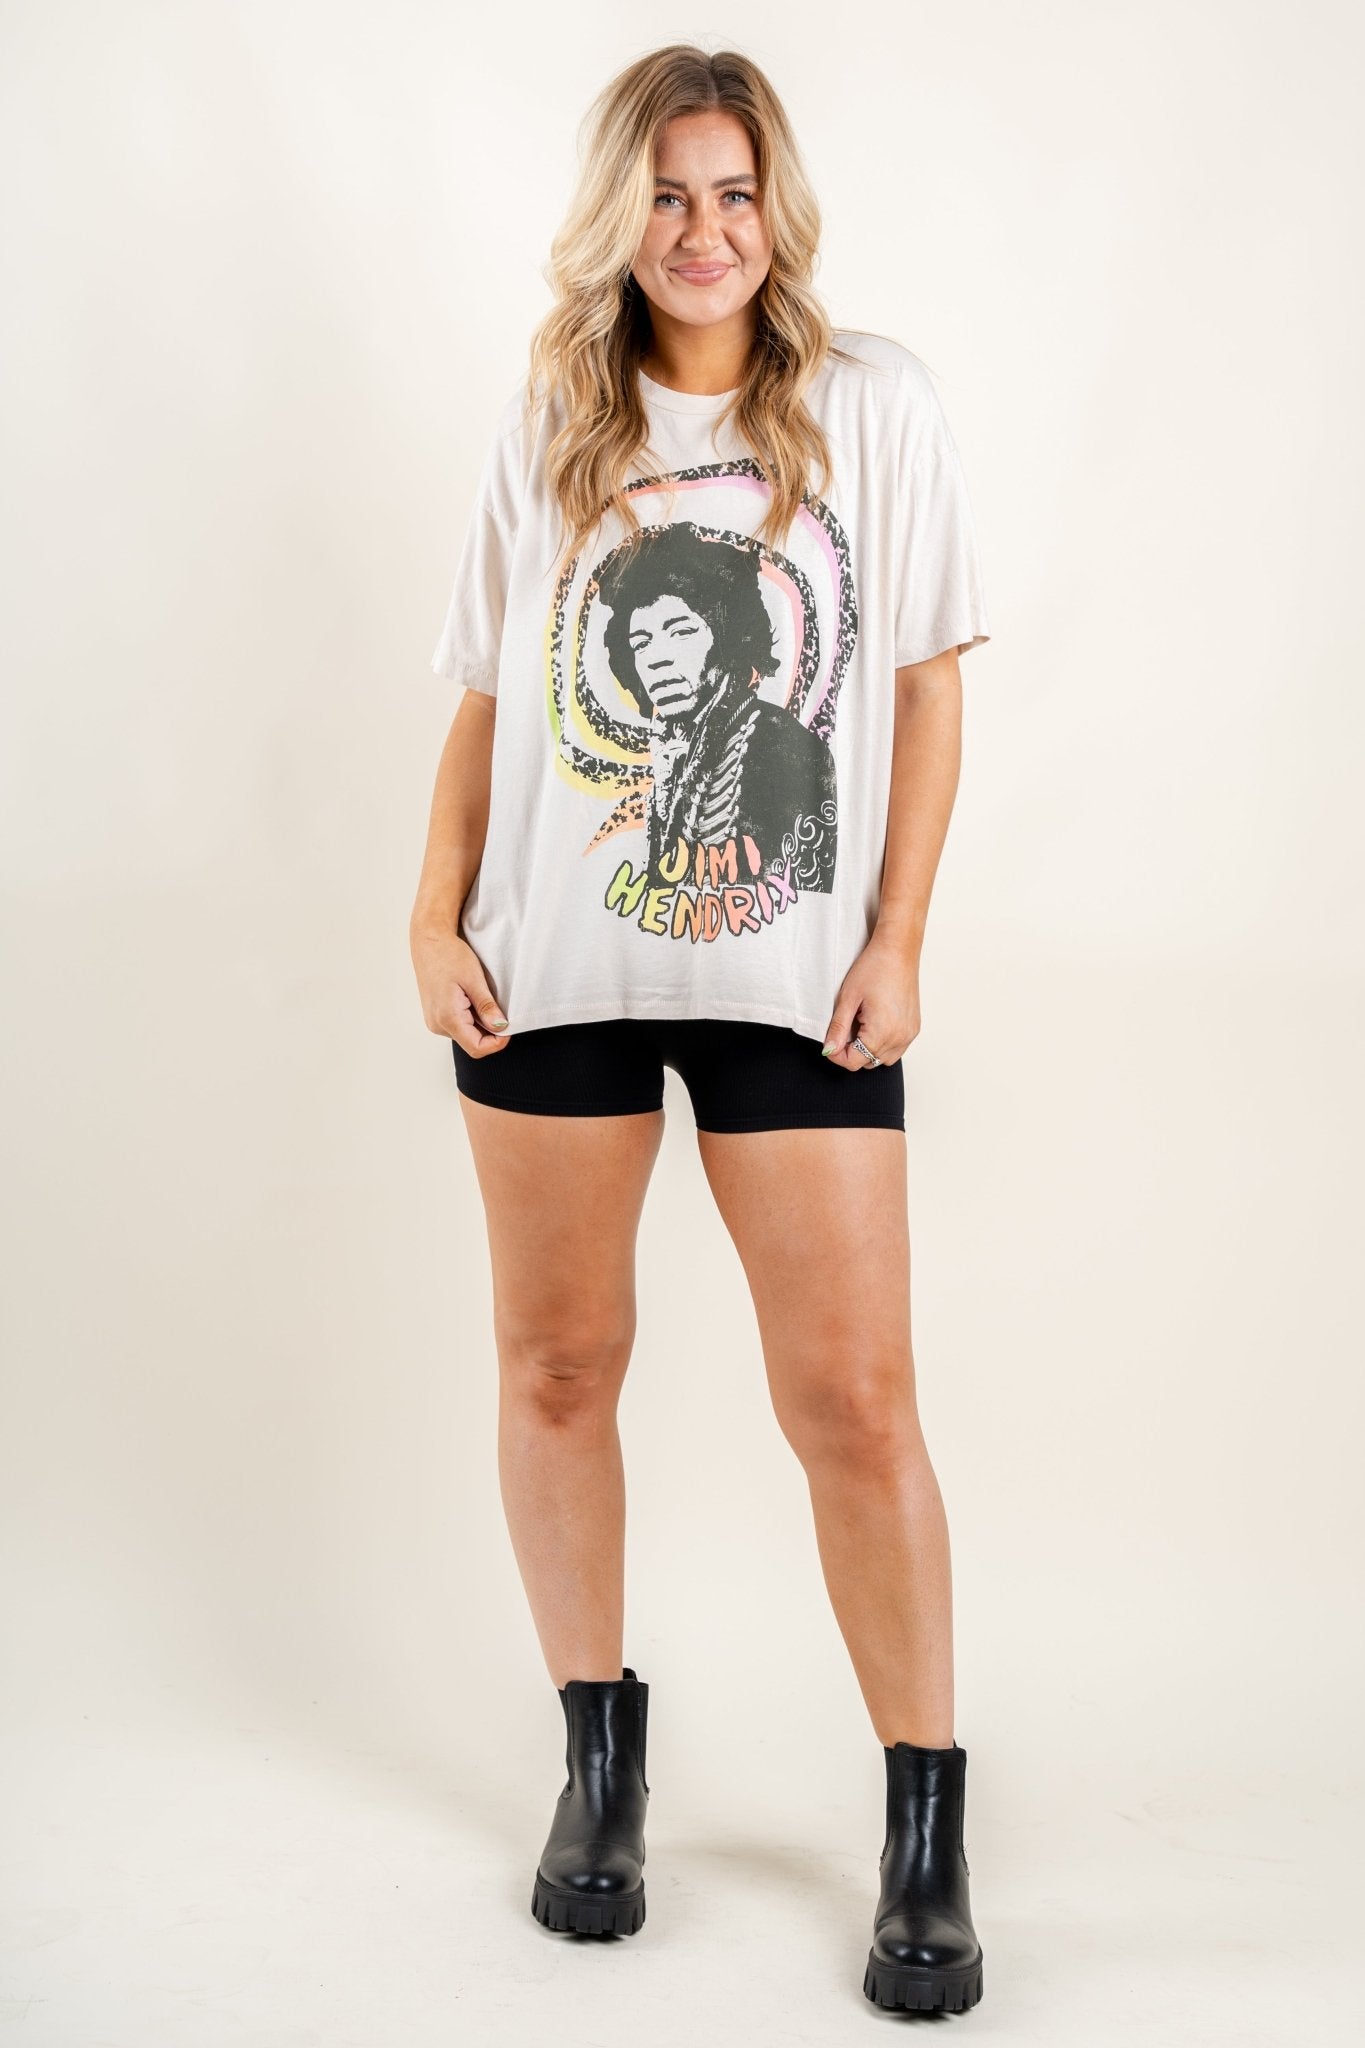 DayDreamer Jimi Hendrix spiral t-shirt dirty white - DayDreamer Clothing at Lush Fashion Lounge Trendy Boutique in Oklahoma City